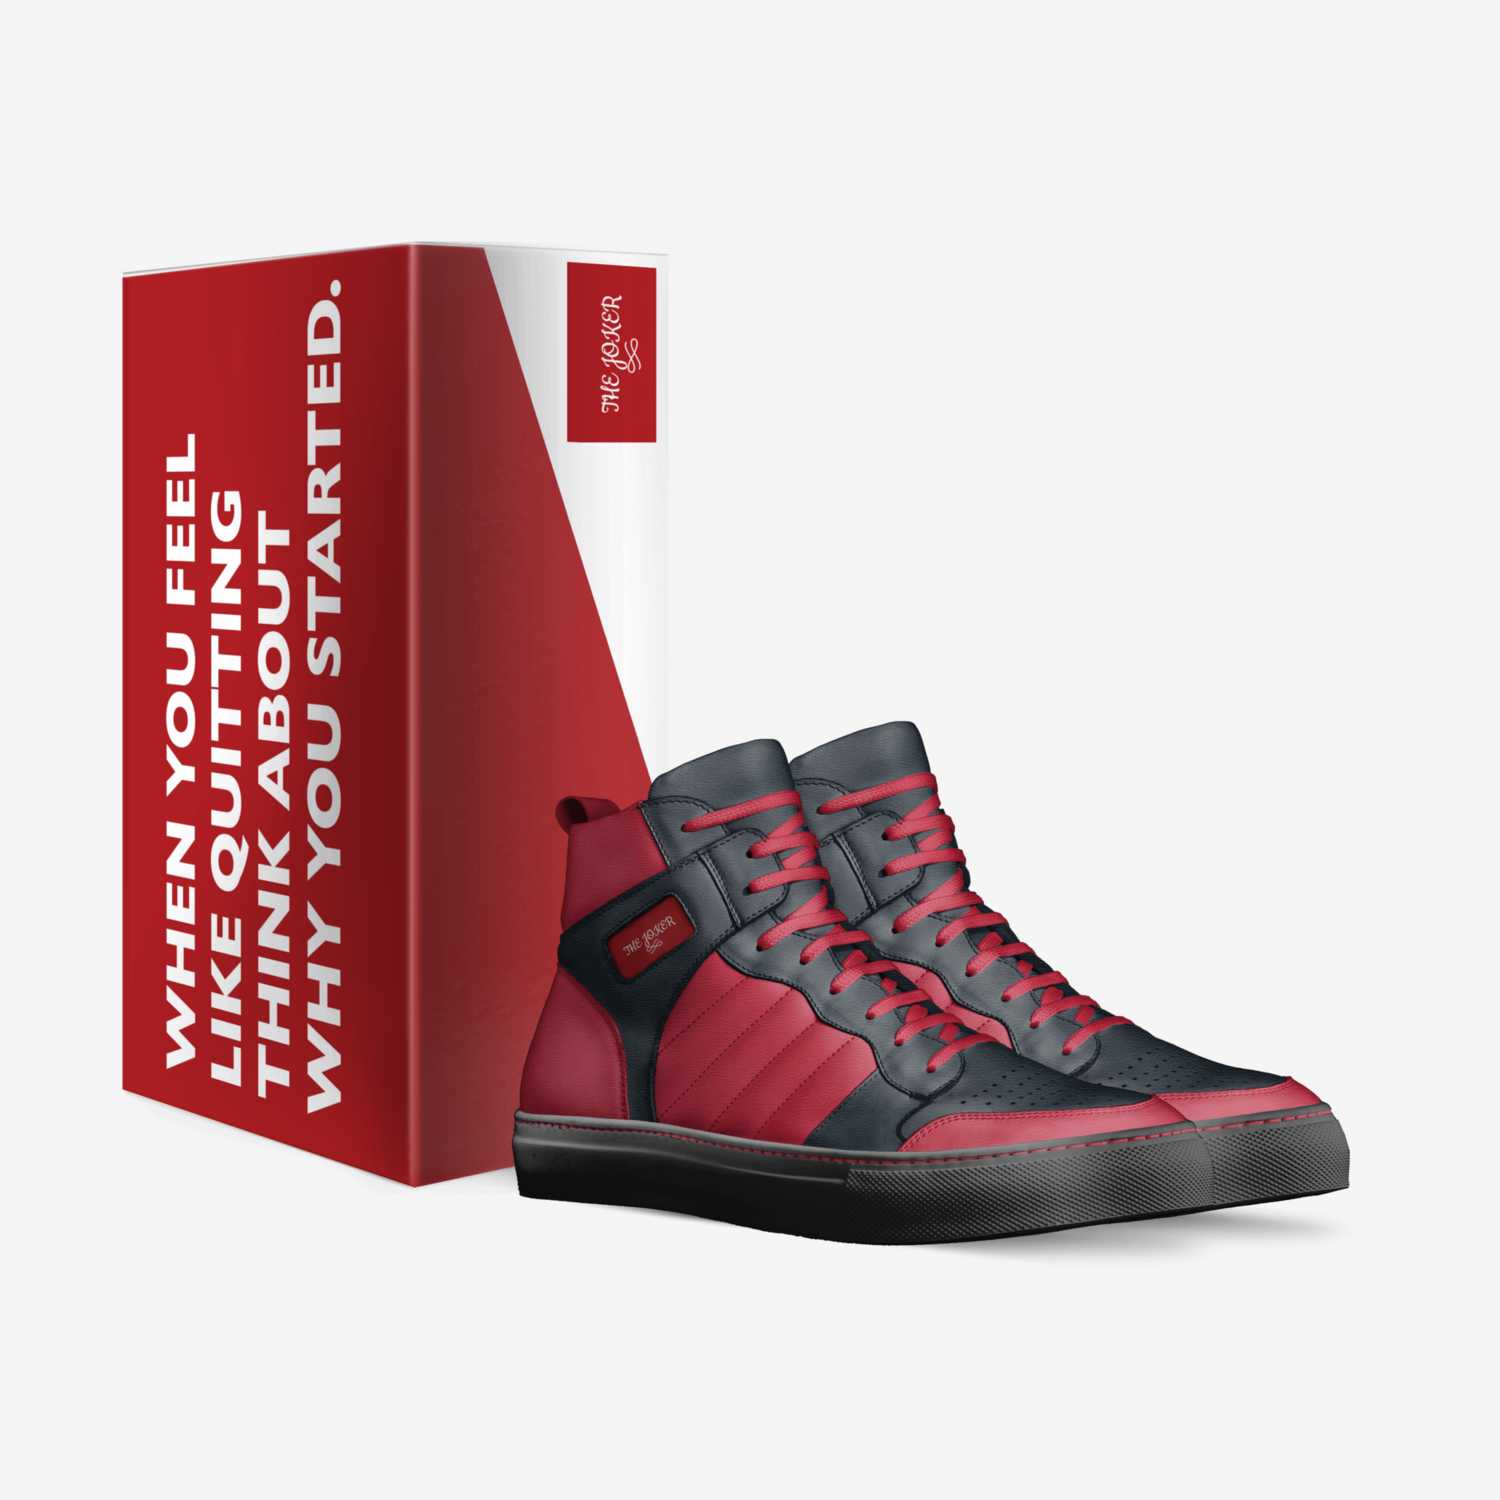 THE JOKER custom made in Italy shoes by Andreas Erhardt Østergaard | Box view